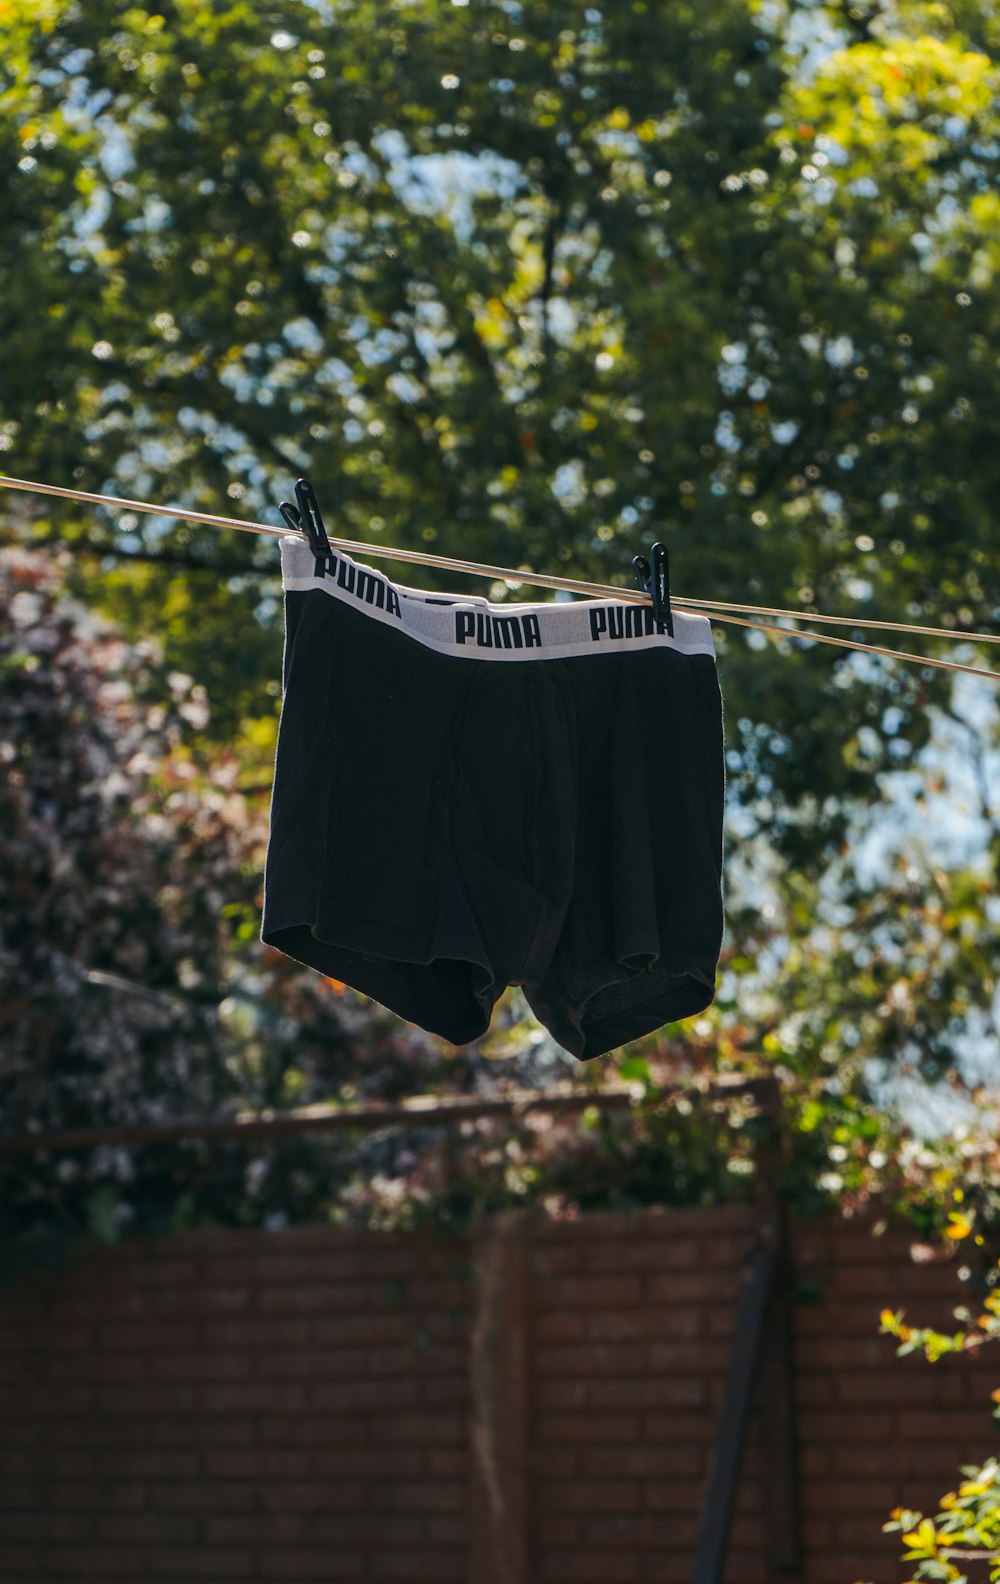 black and white shorts hanging on clothes hanger